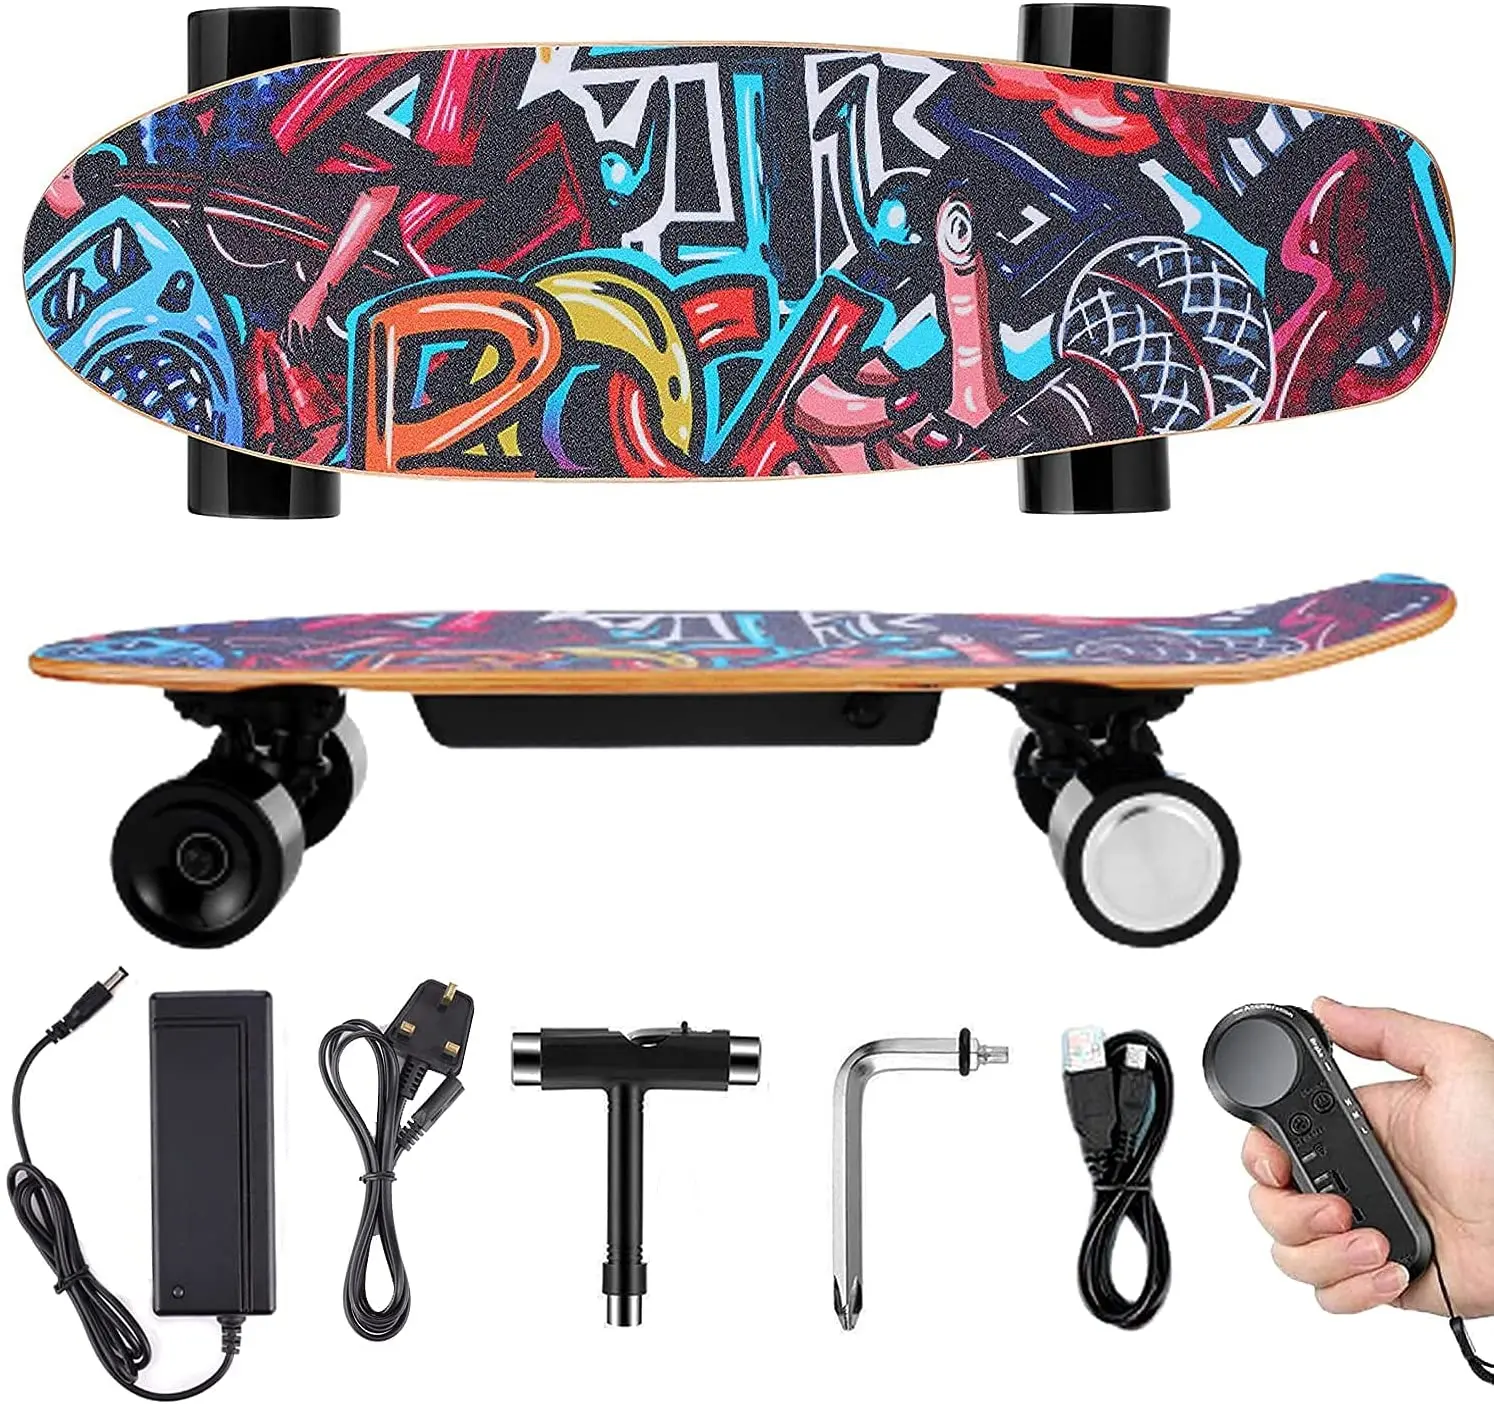 

7 Layers Maple Longboard Top Speed 10 Miles Range Electric Skateboard with Remote Control